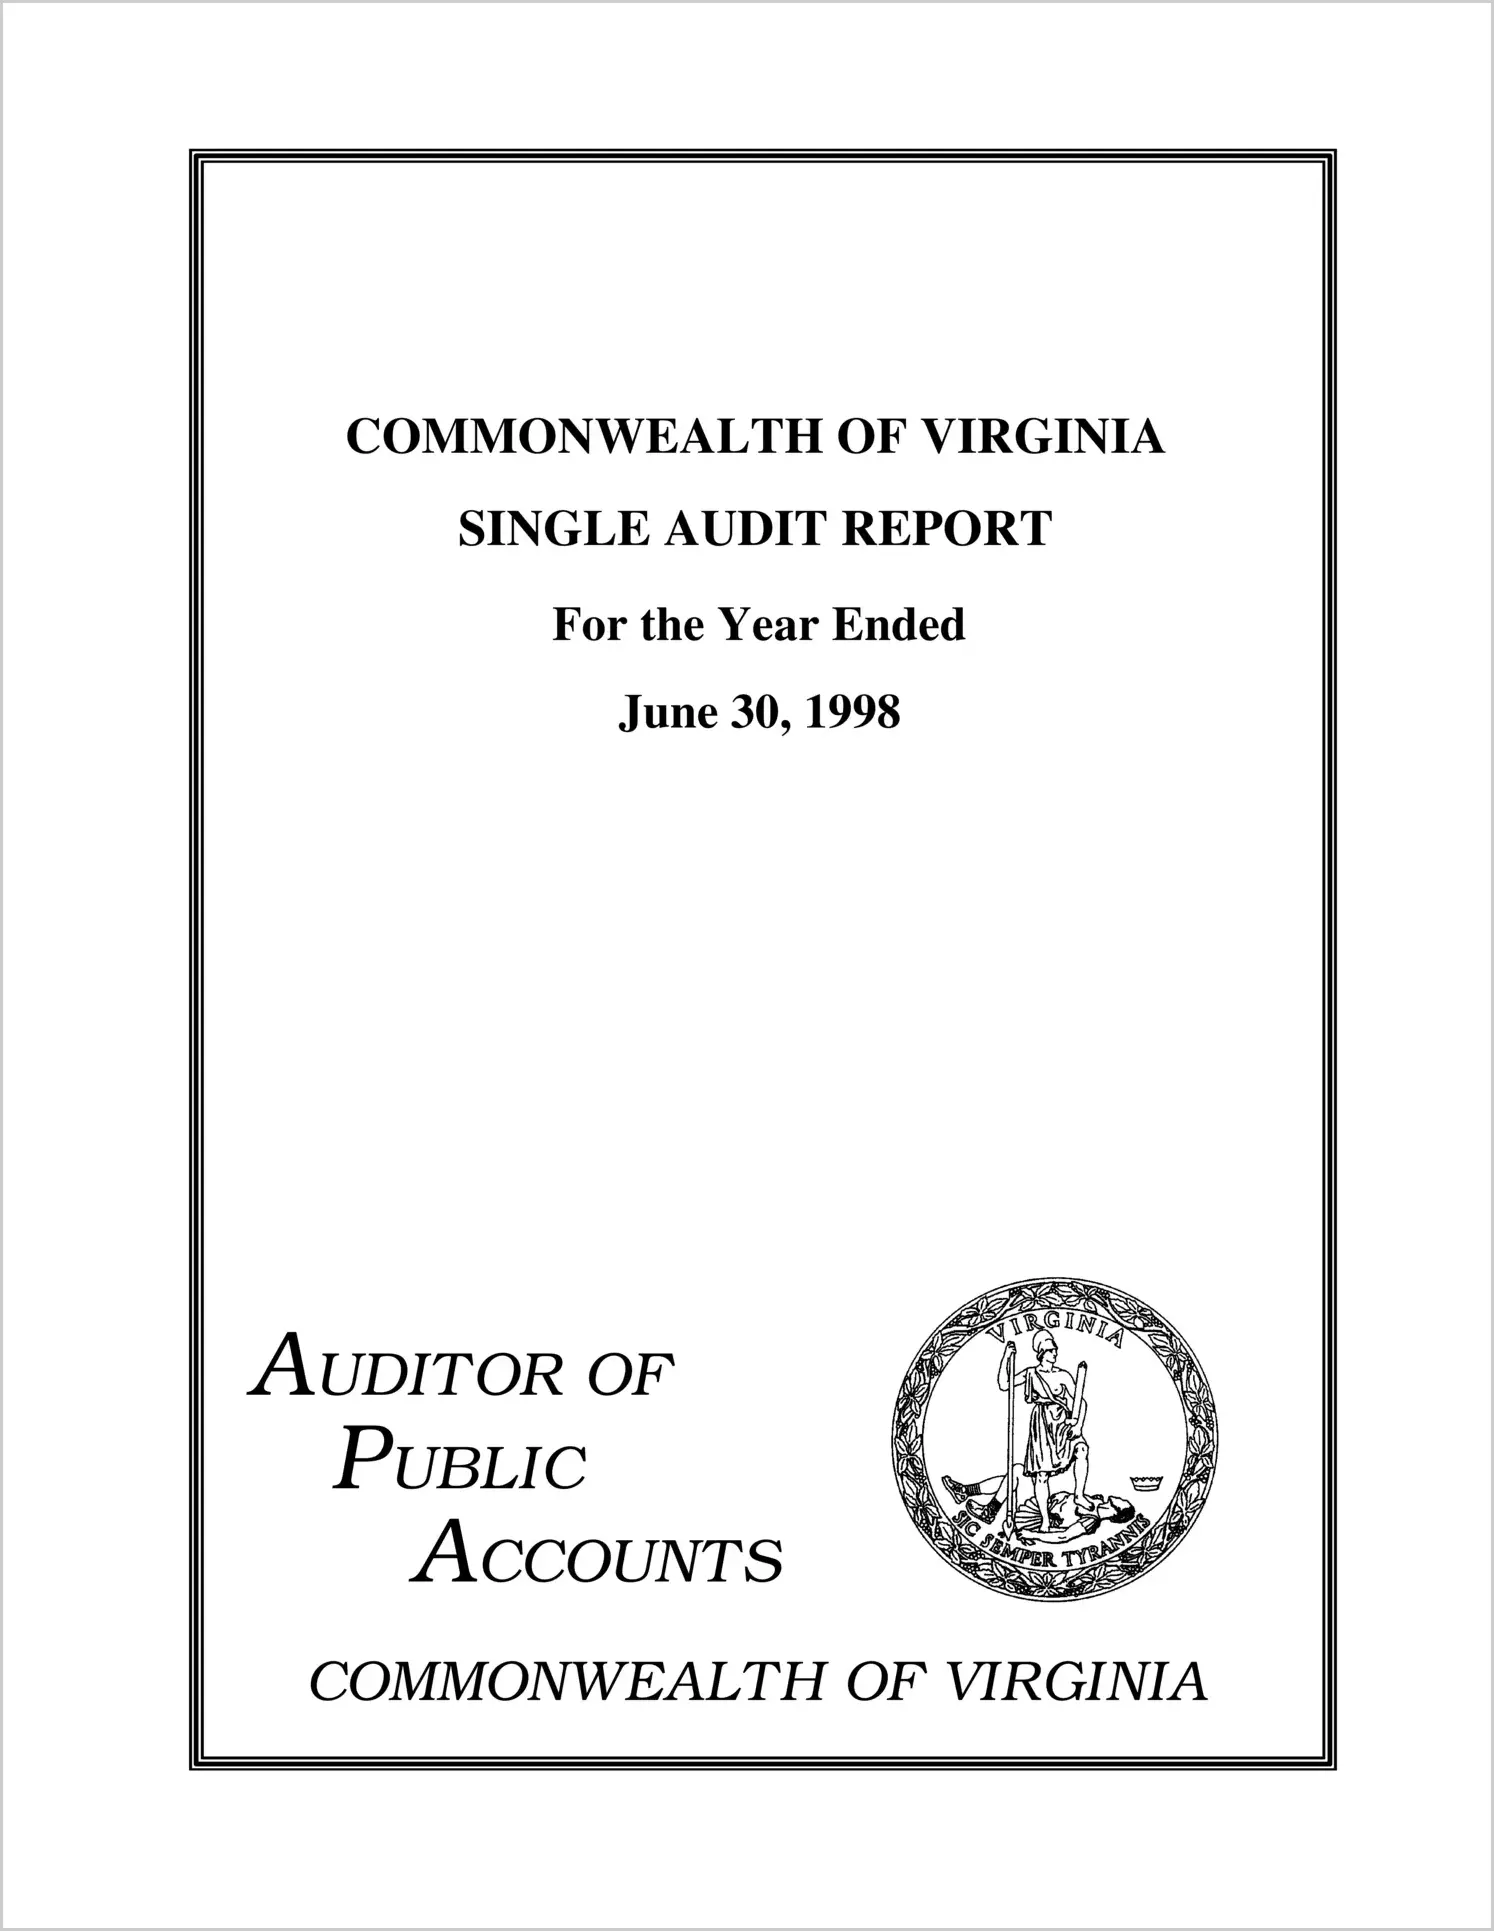 Commonwealth of Virginia Single Audit Report for the Year Ended June 30, 1998